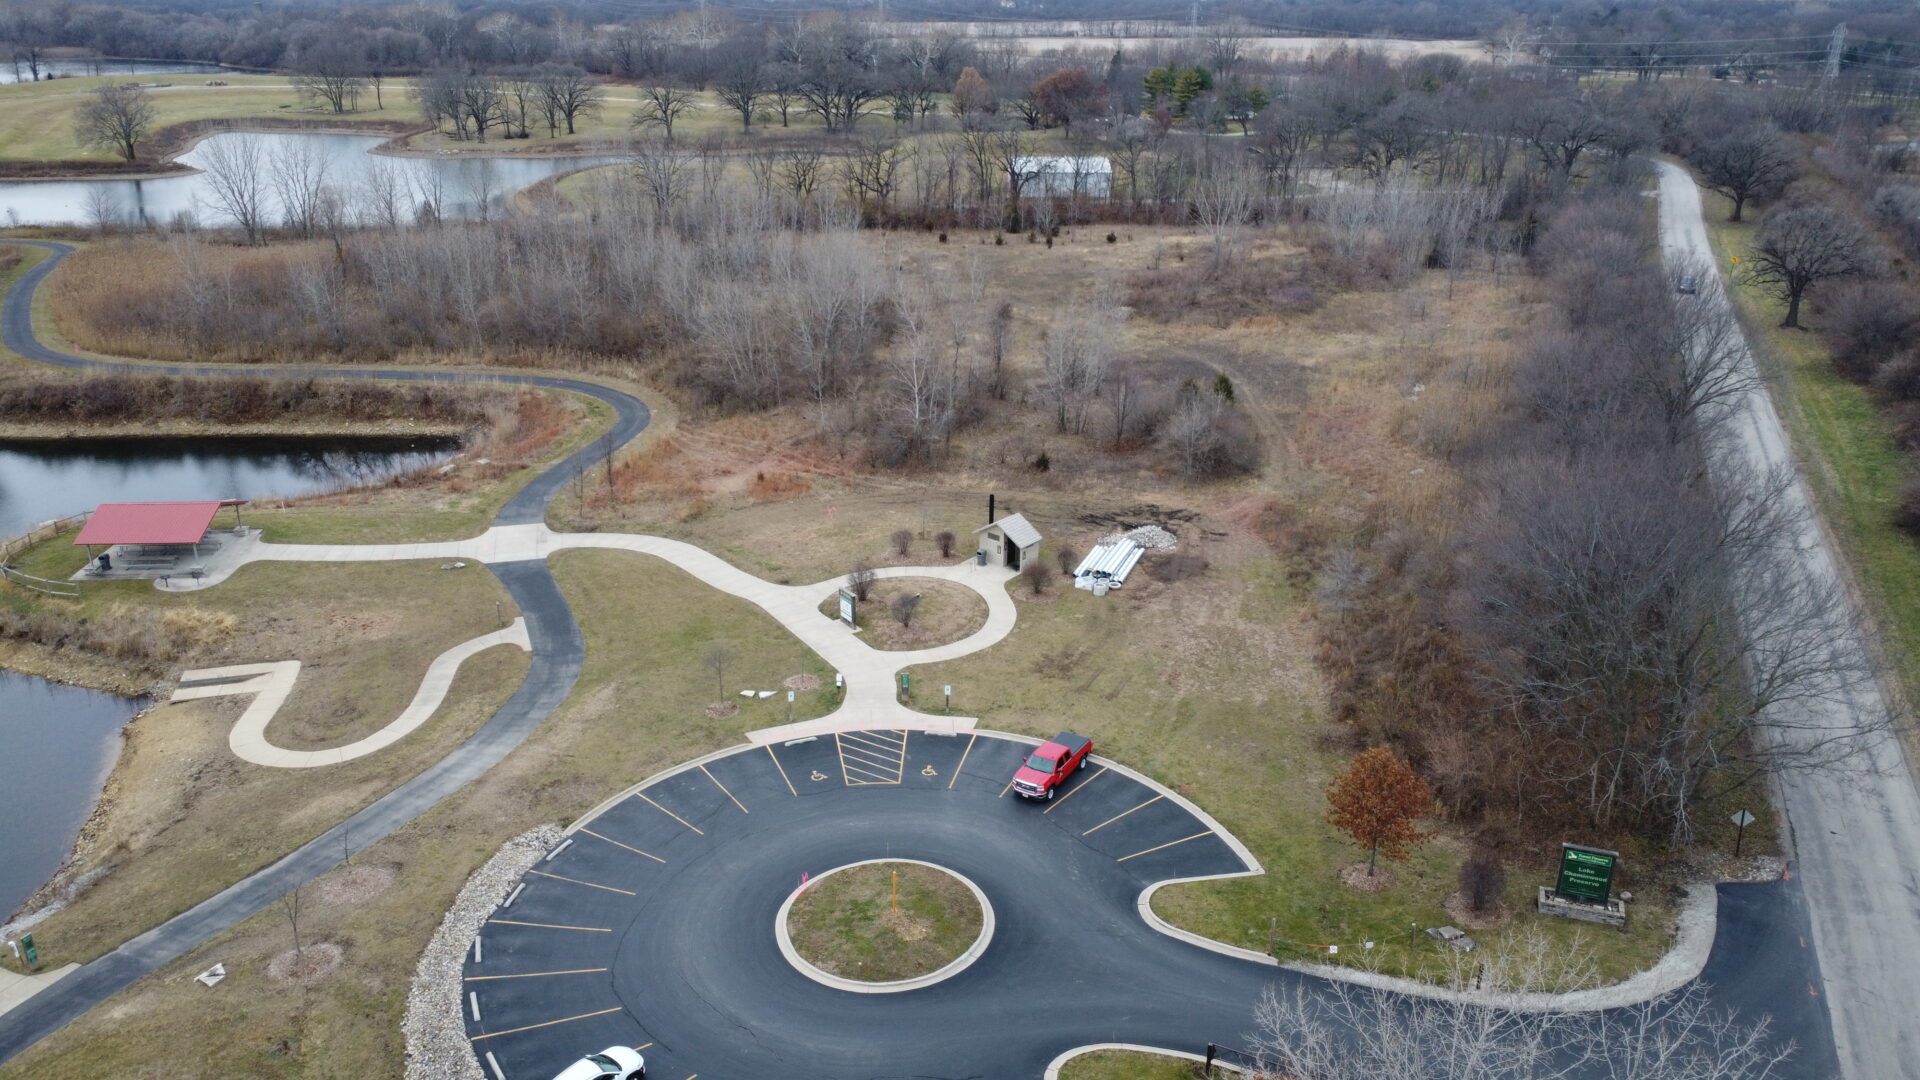 Aerial view of park with winding paths and small lakes.